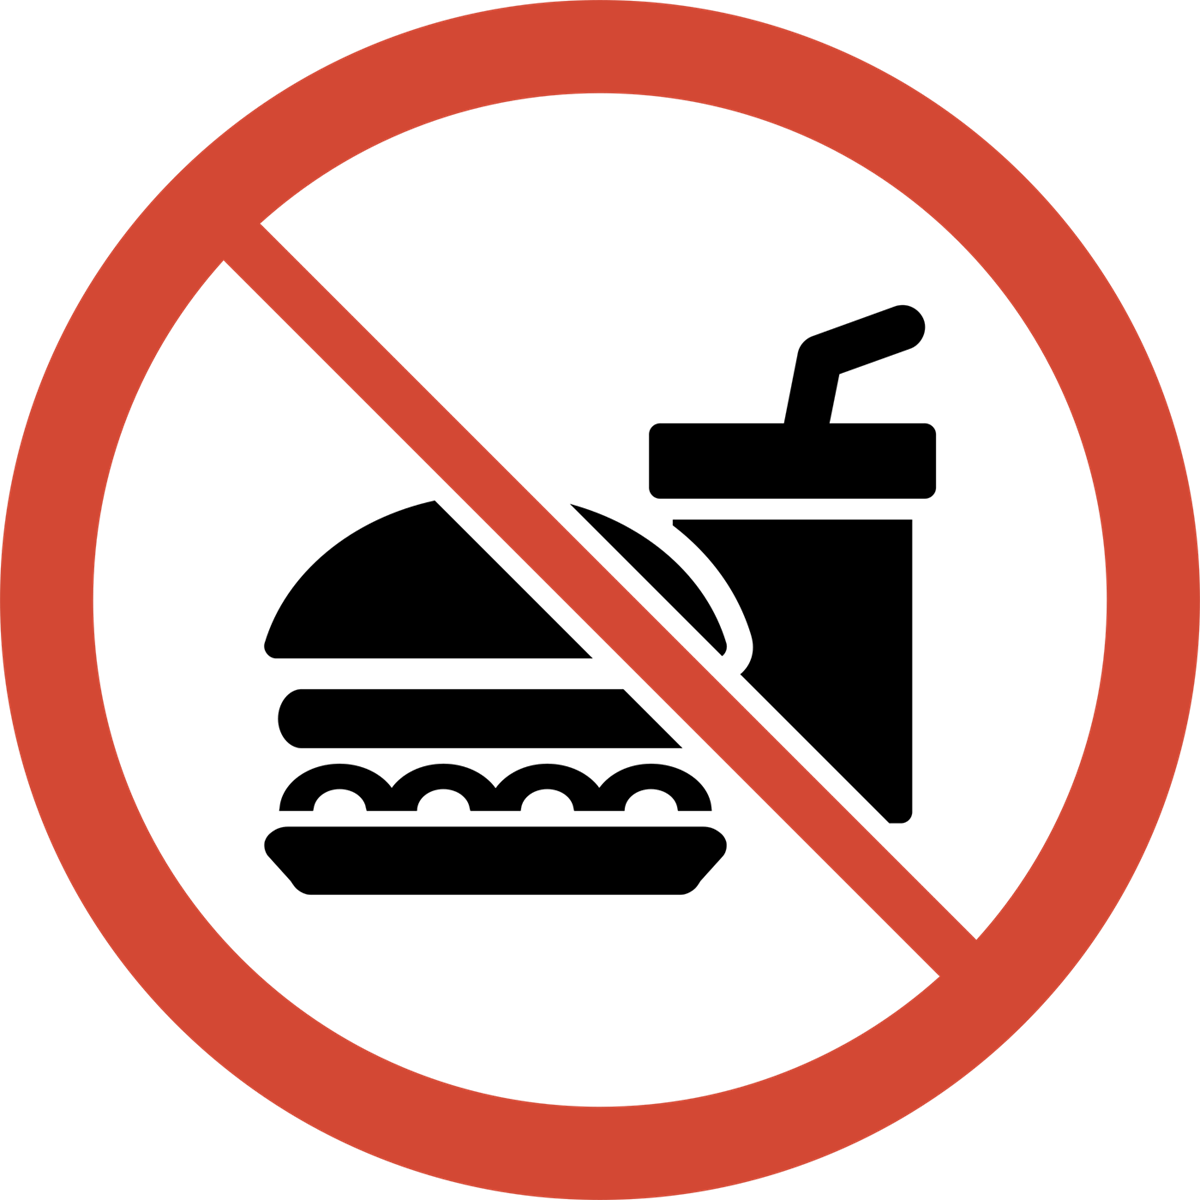 Clipart: no food or drink. At the UMass Lowell Testing Centers: No food or drink allowed in the testing areas unless for accommodation.